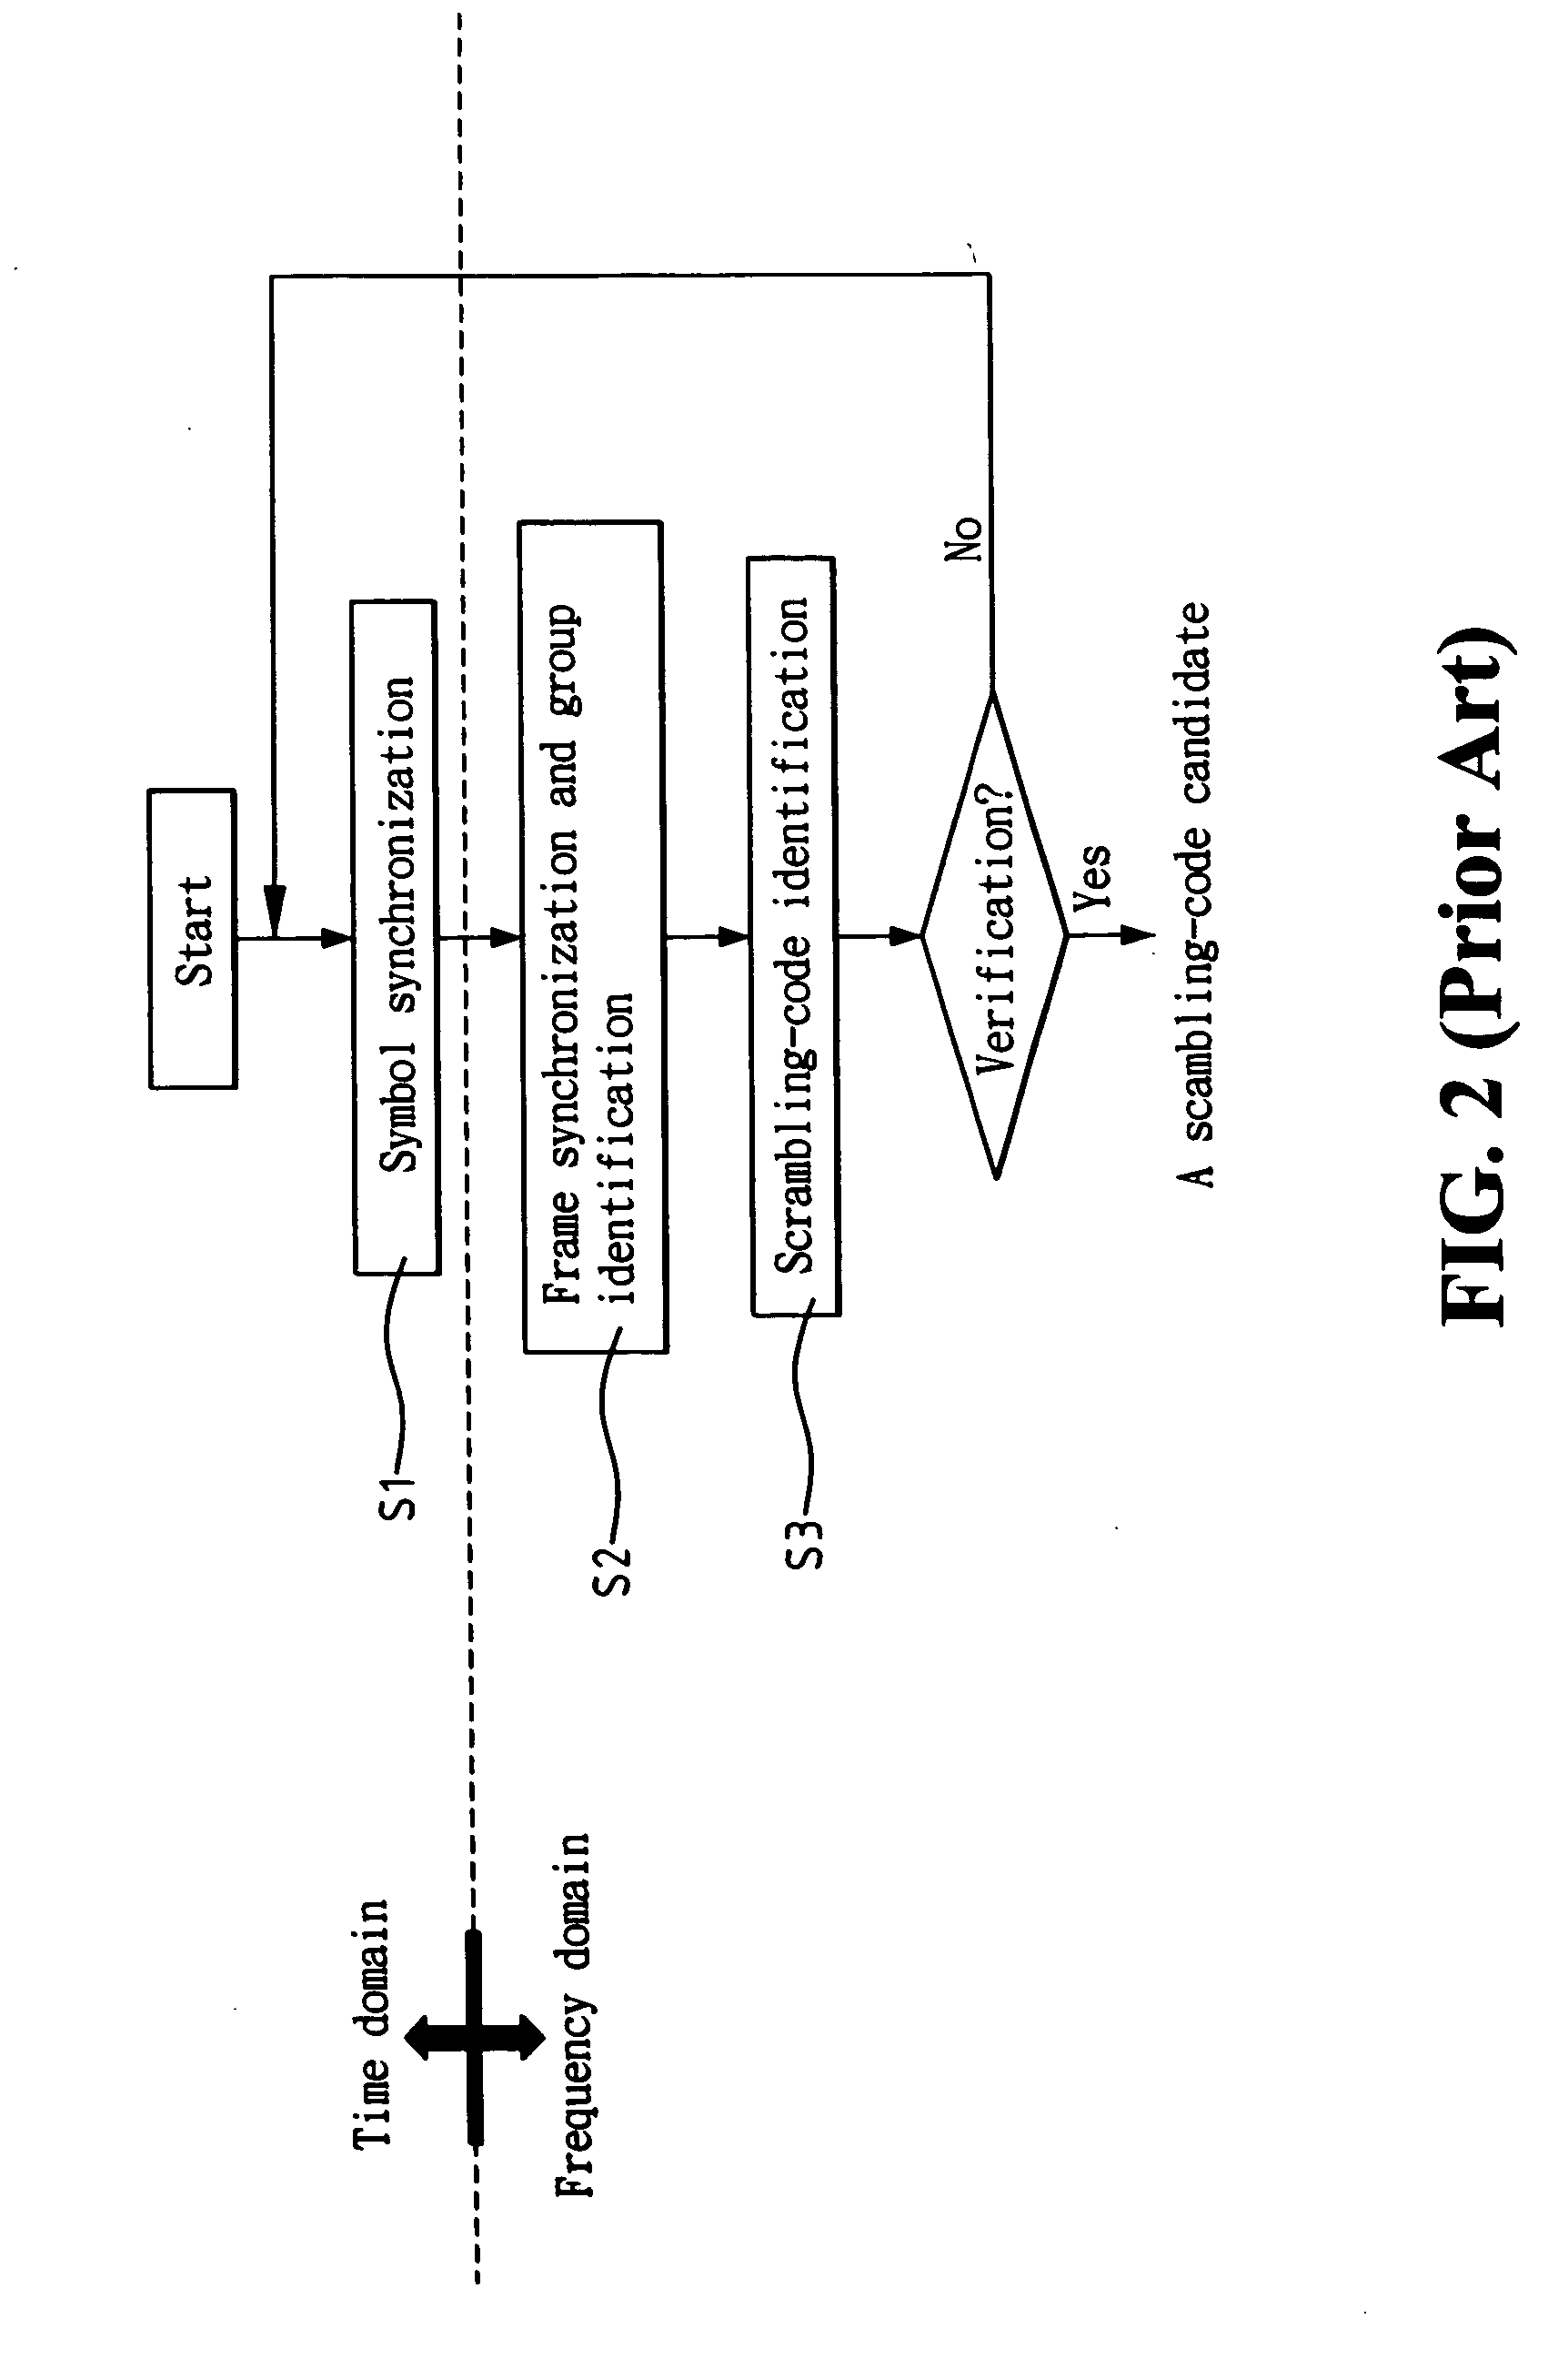 Cell search method for orthogonal frequency division multiplexing based cellular communication system